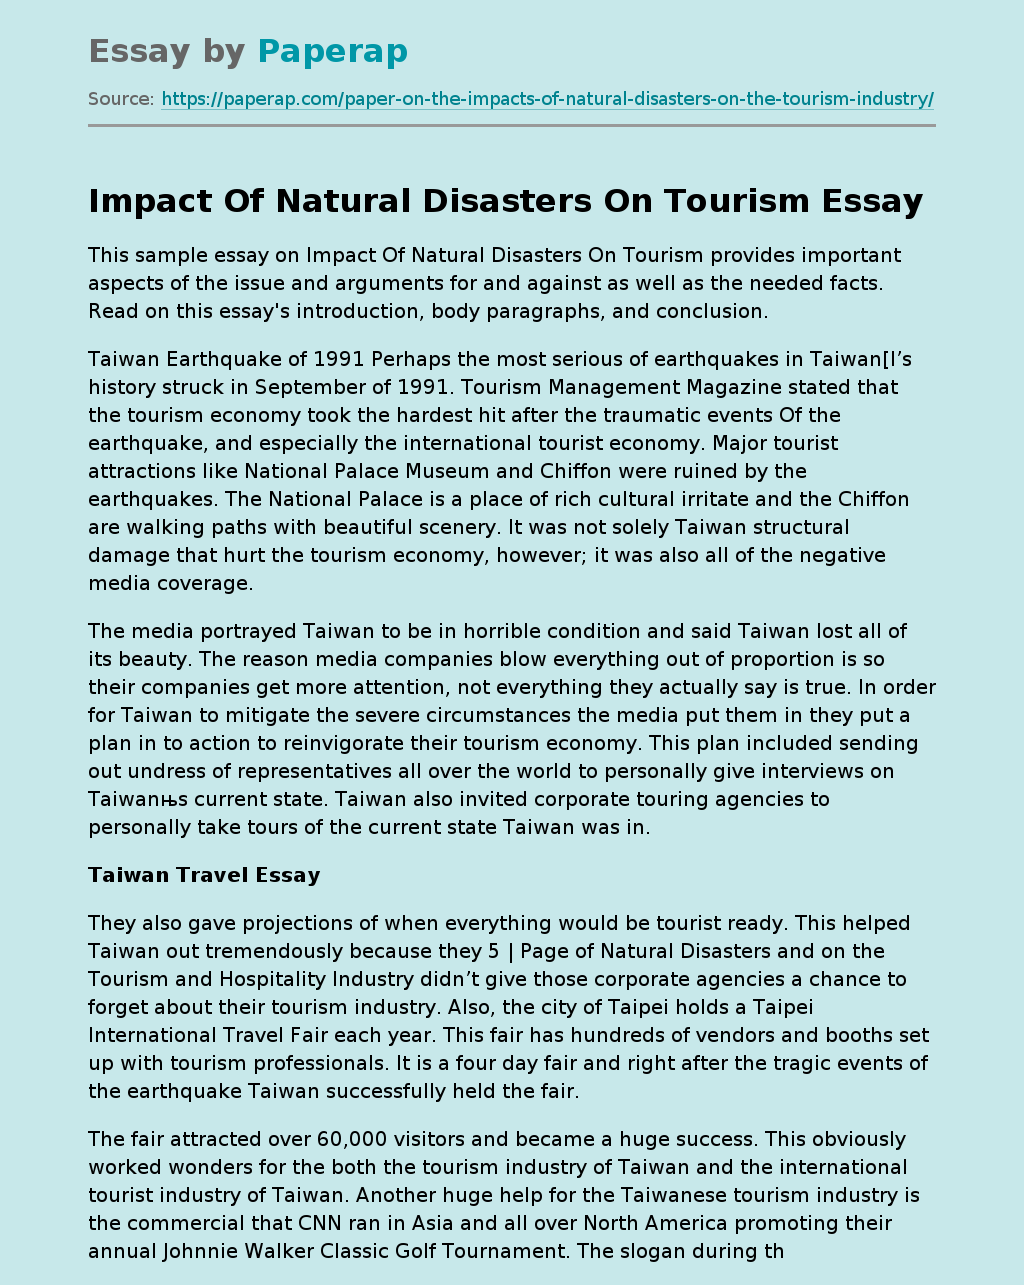 Impact Of Natural Disasters On Tourism